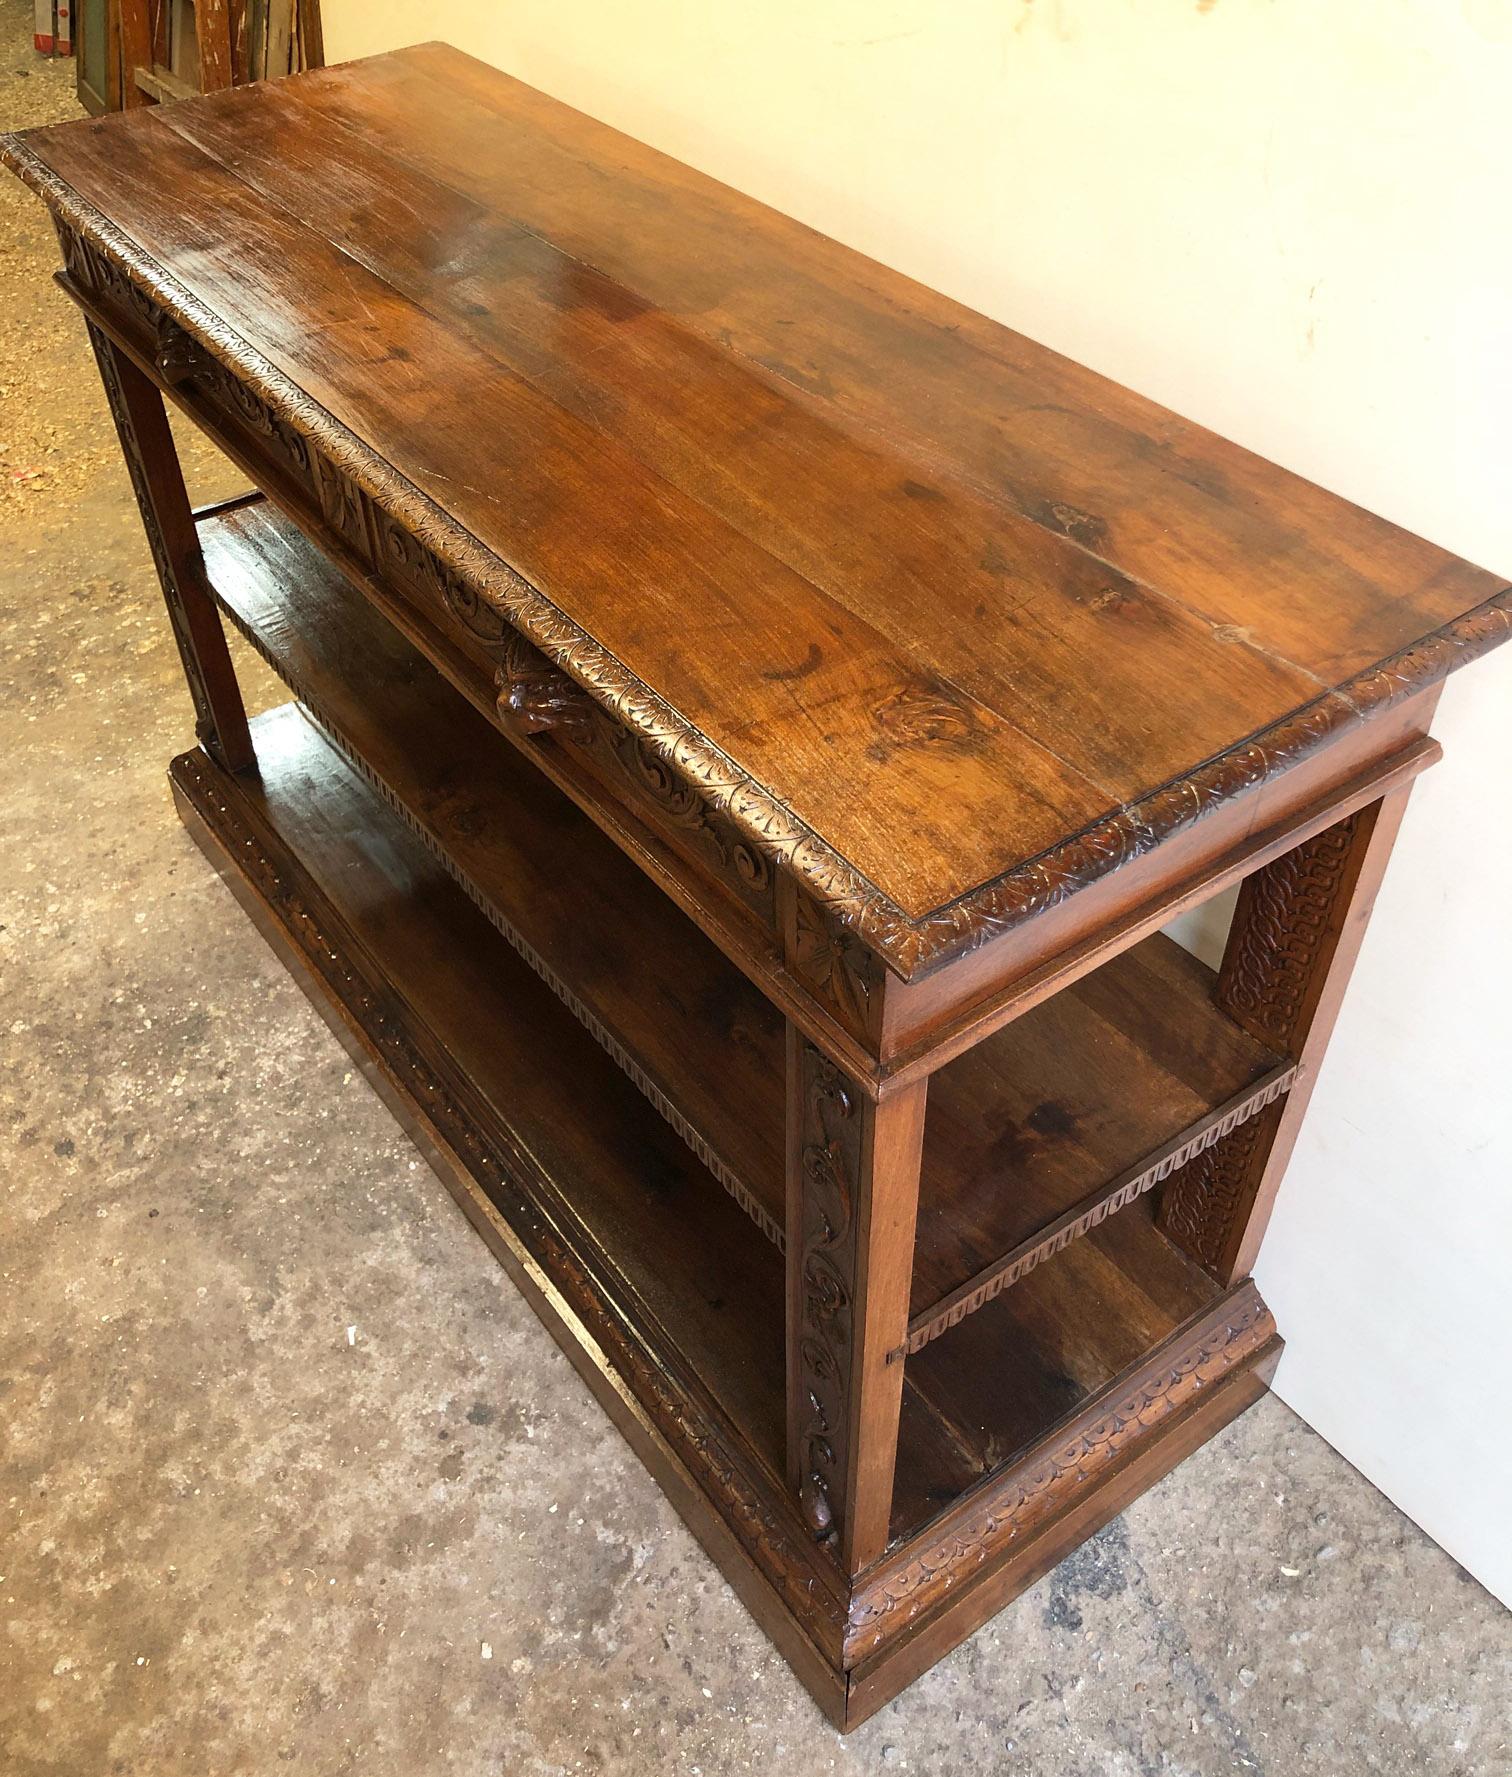 Late 19th century console in hand-carved solid walnut with two drawers in original natural color.
Umbertine style, with intermediate shelf.
The carvings are all done manually.
In ancient times it had a mirror resting on the top.
The handles to open